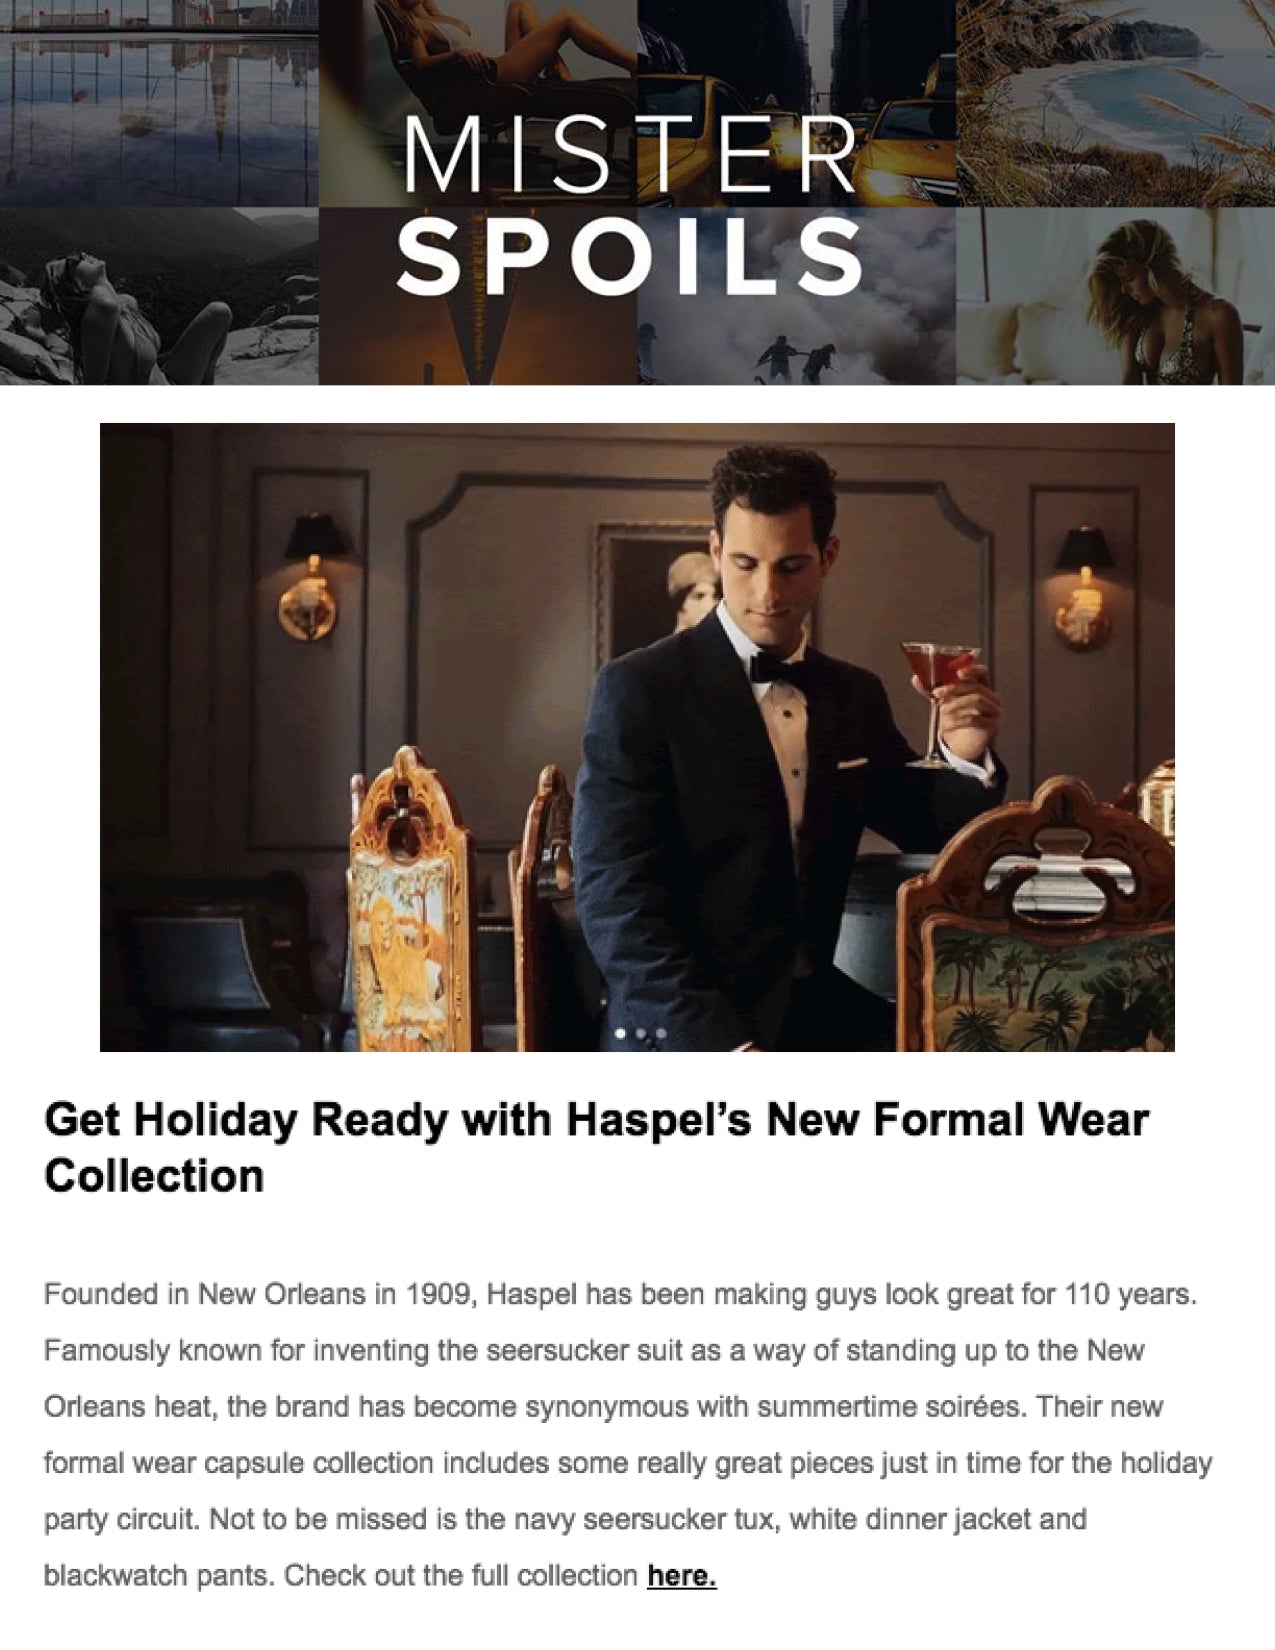 Get Holiday Ready with Haspel's New Formal Wear Collection | MISTER SPOILS | NOVEMBER 2019